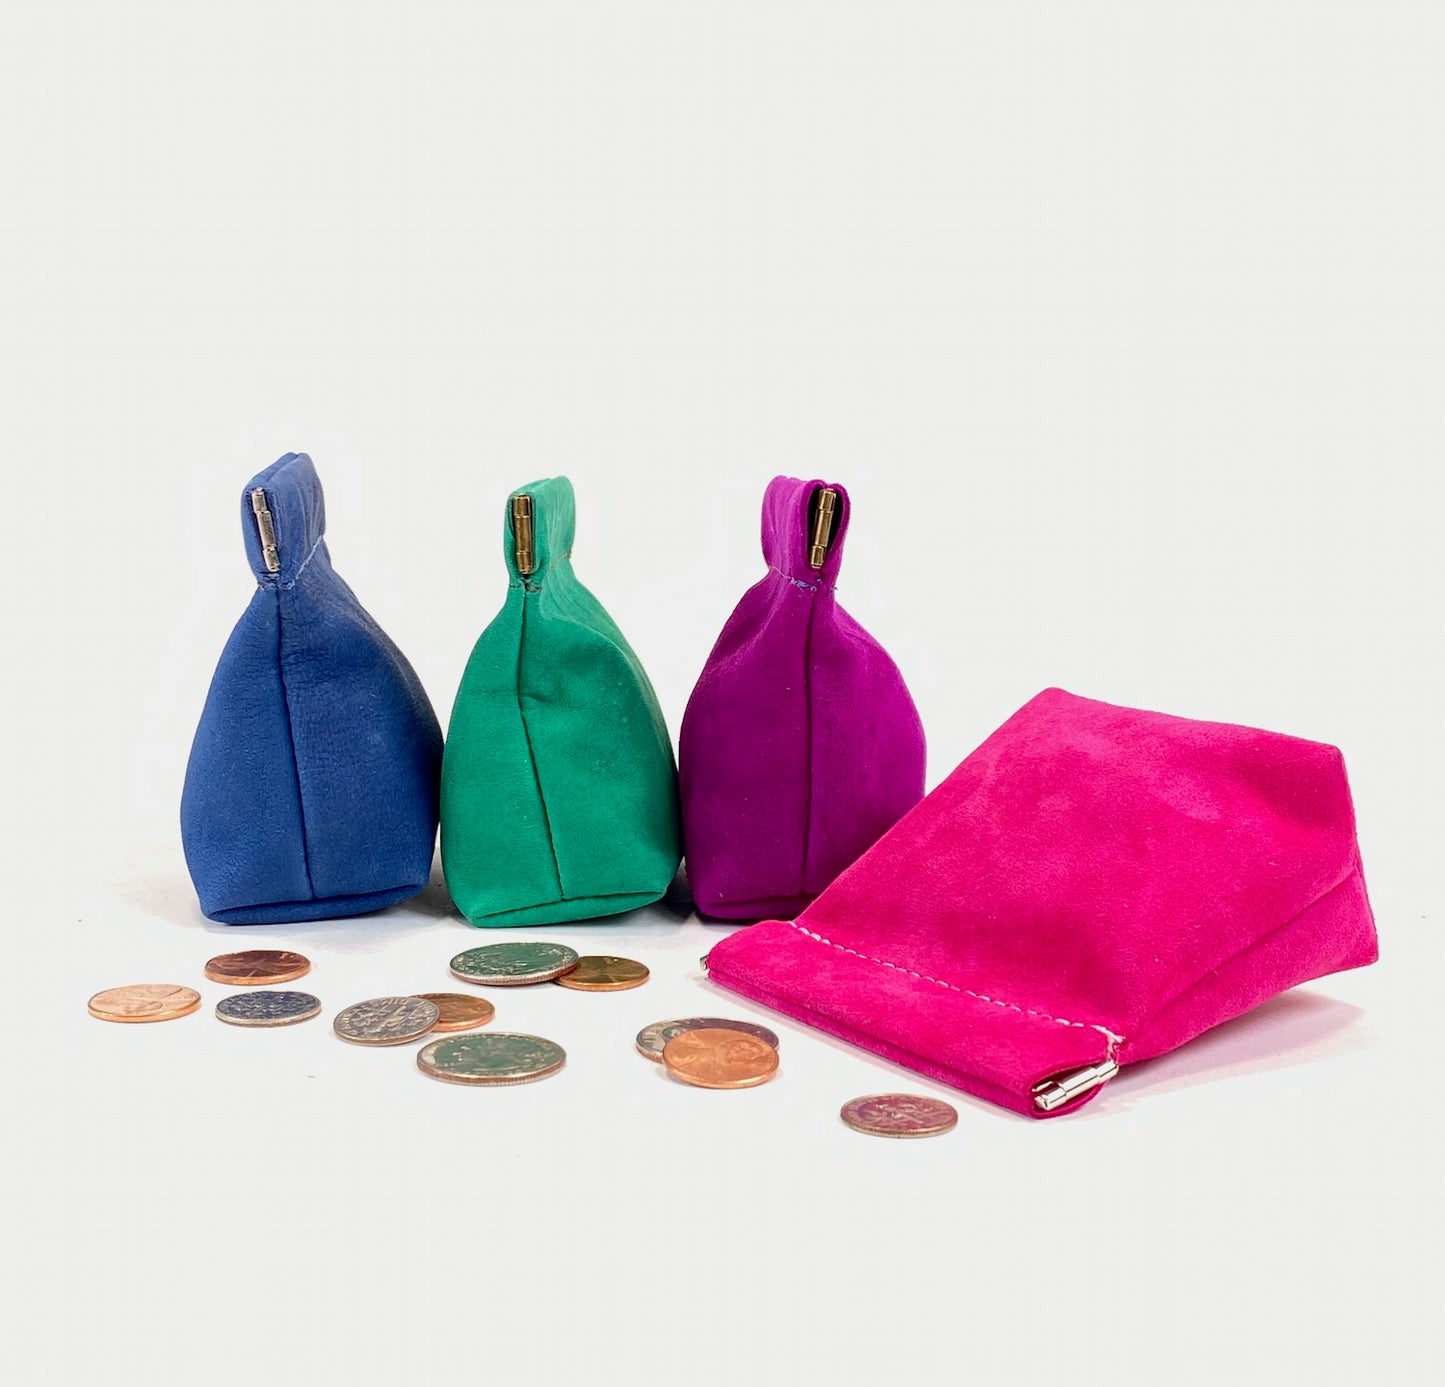 Suede Leather Squeeze Pouch in Hot Pink